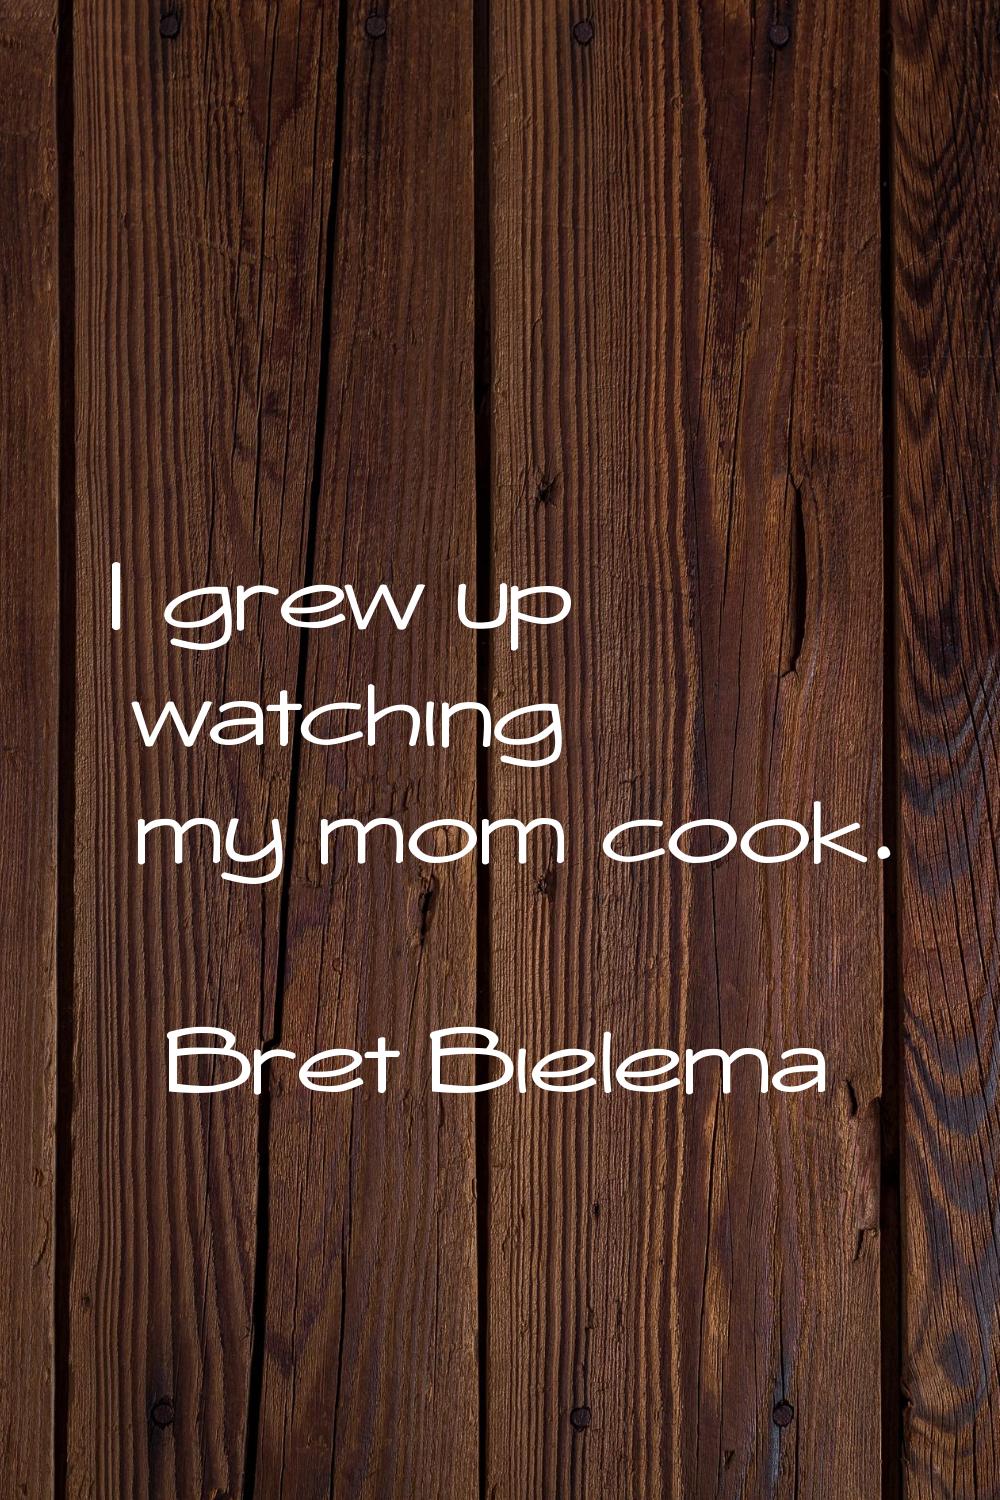 I grew up watching my mom cook.